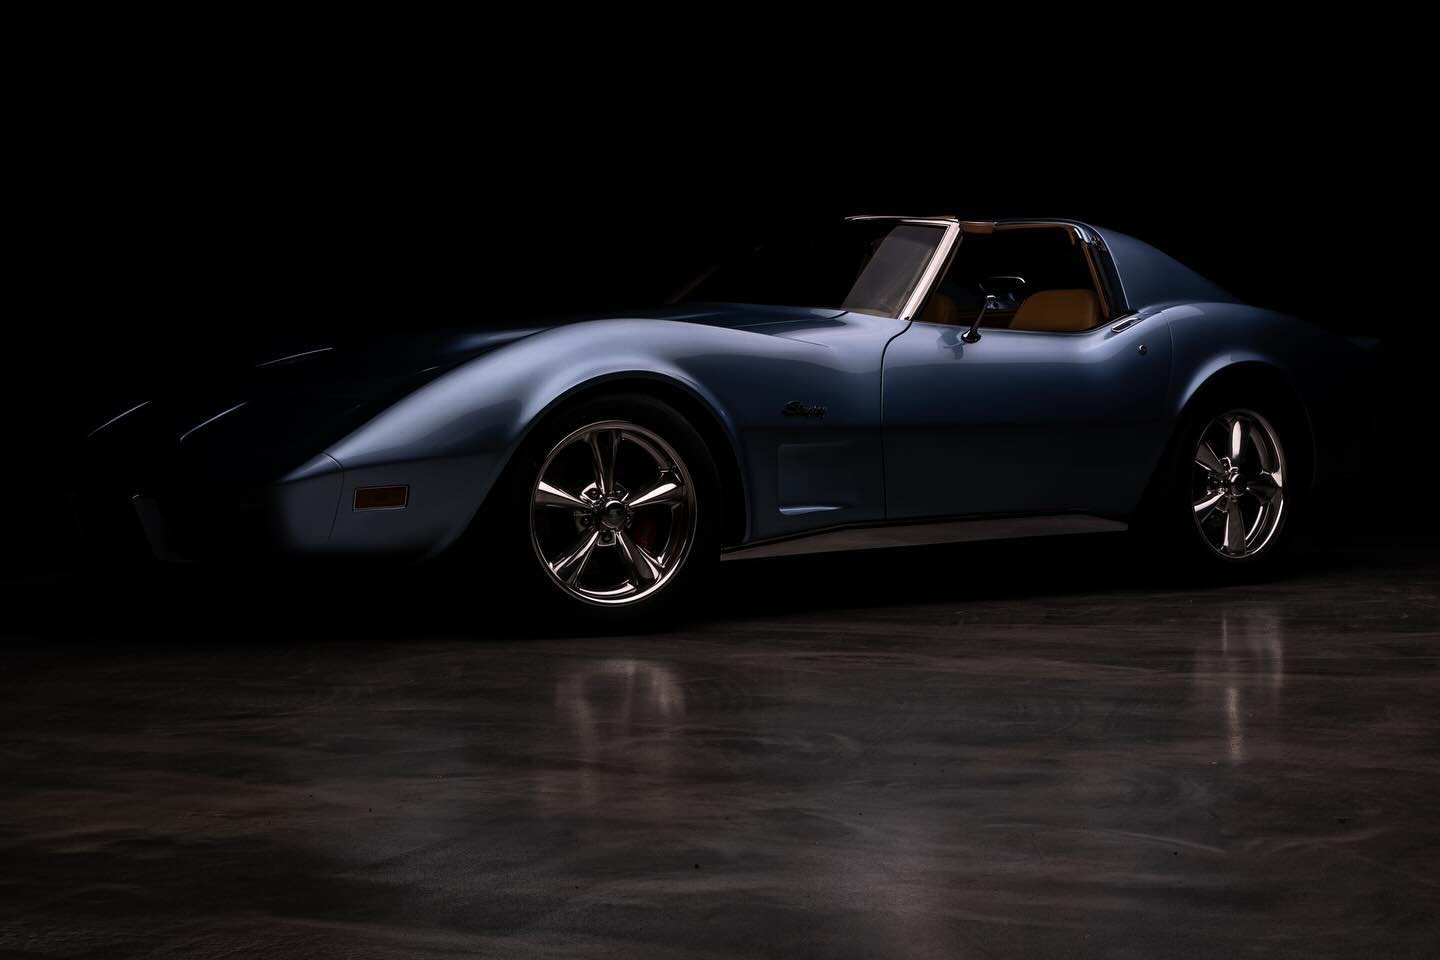 The 2024 Charles Schwab Challenge is less than a month away &amp; this 1975 Corvette is closer to meeting its future owner. Click the link in our bio to see the full gallery and learn more about this special car! 

#corvette #corvetterestomod #restom